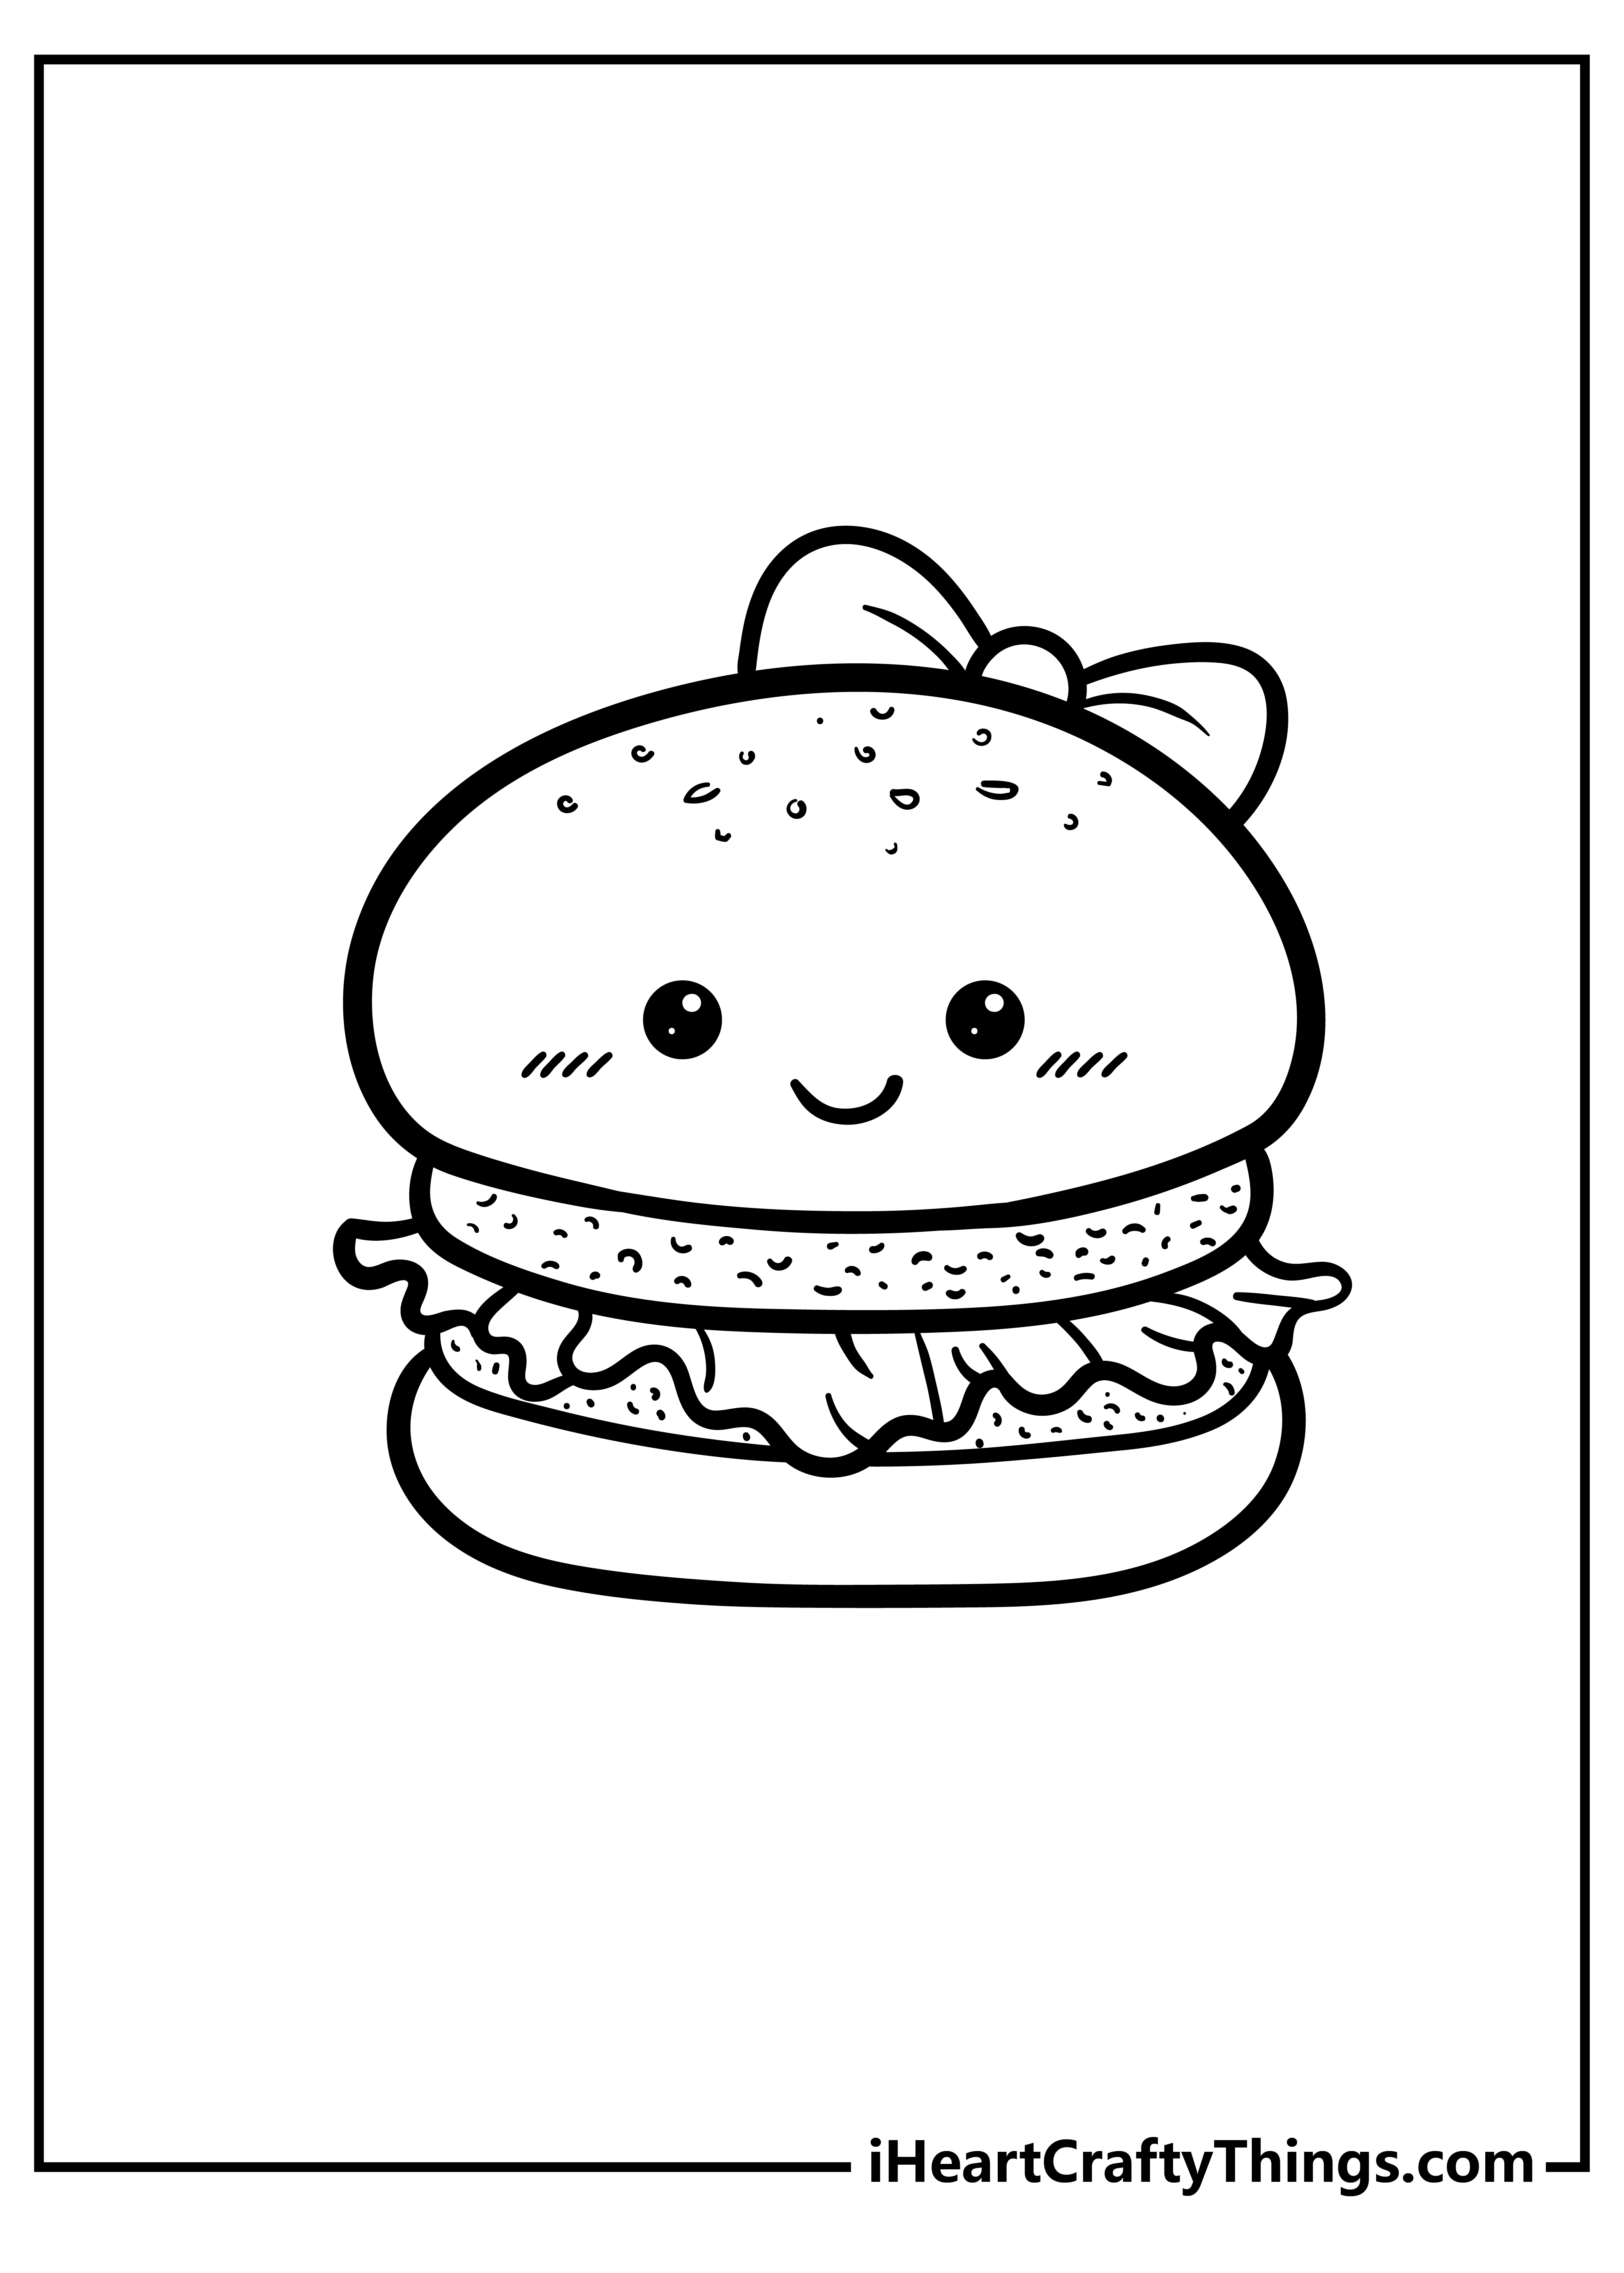 Cute food coloring pages food coloring pages cute food food coloring